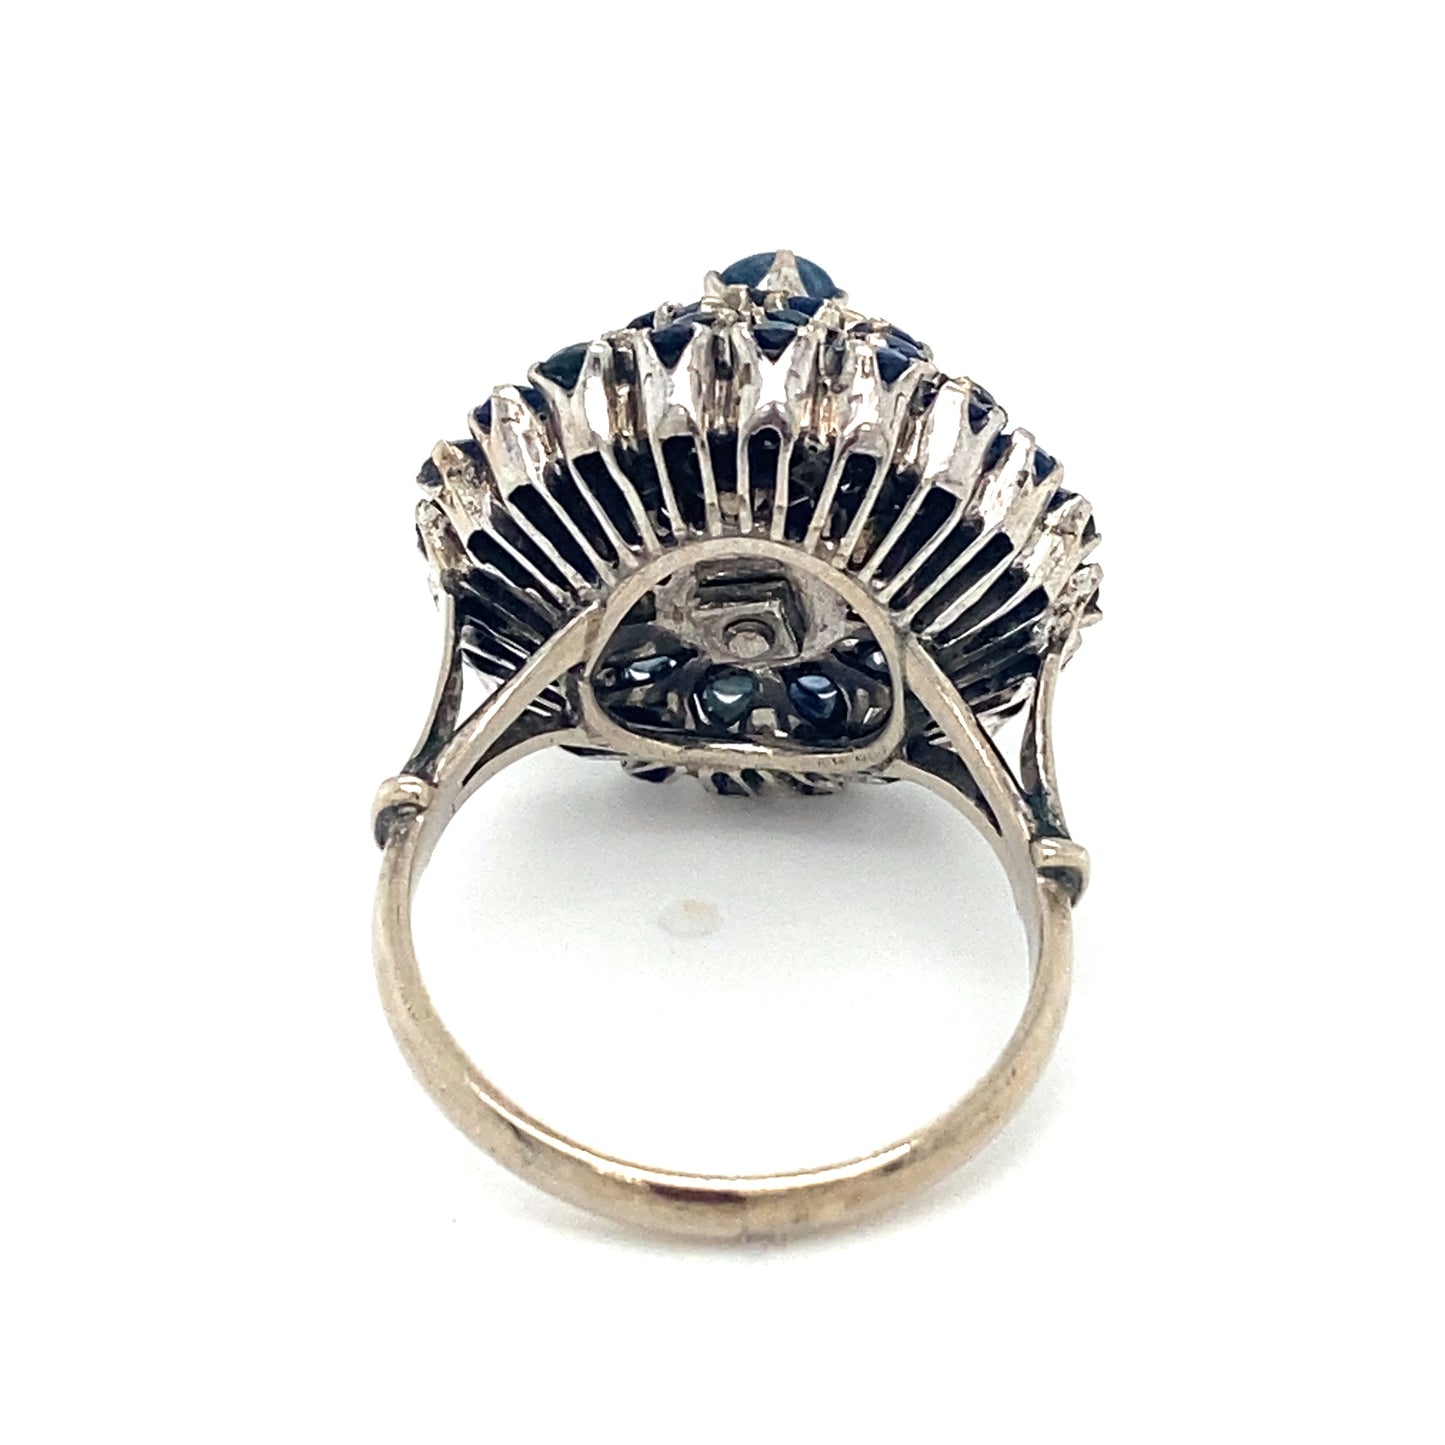 Circa 1950s Sapphire Tiered Princess Ring in 14K White Gold